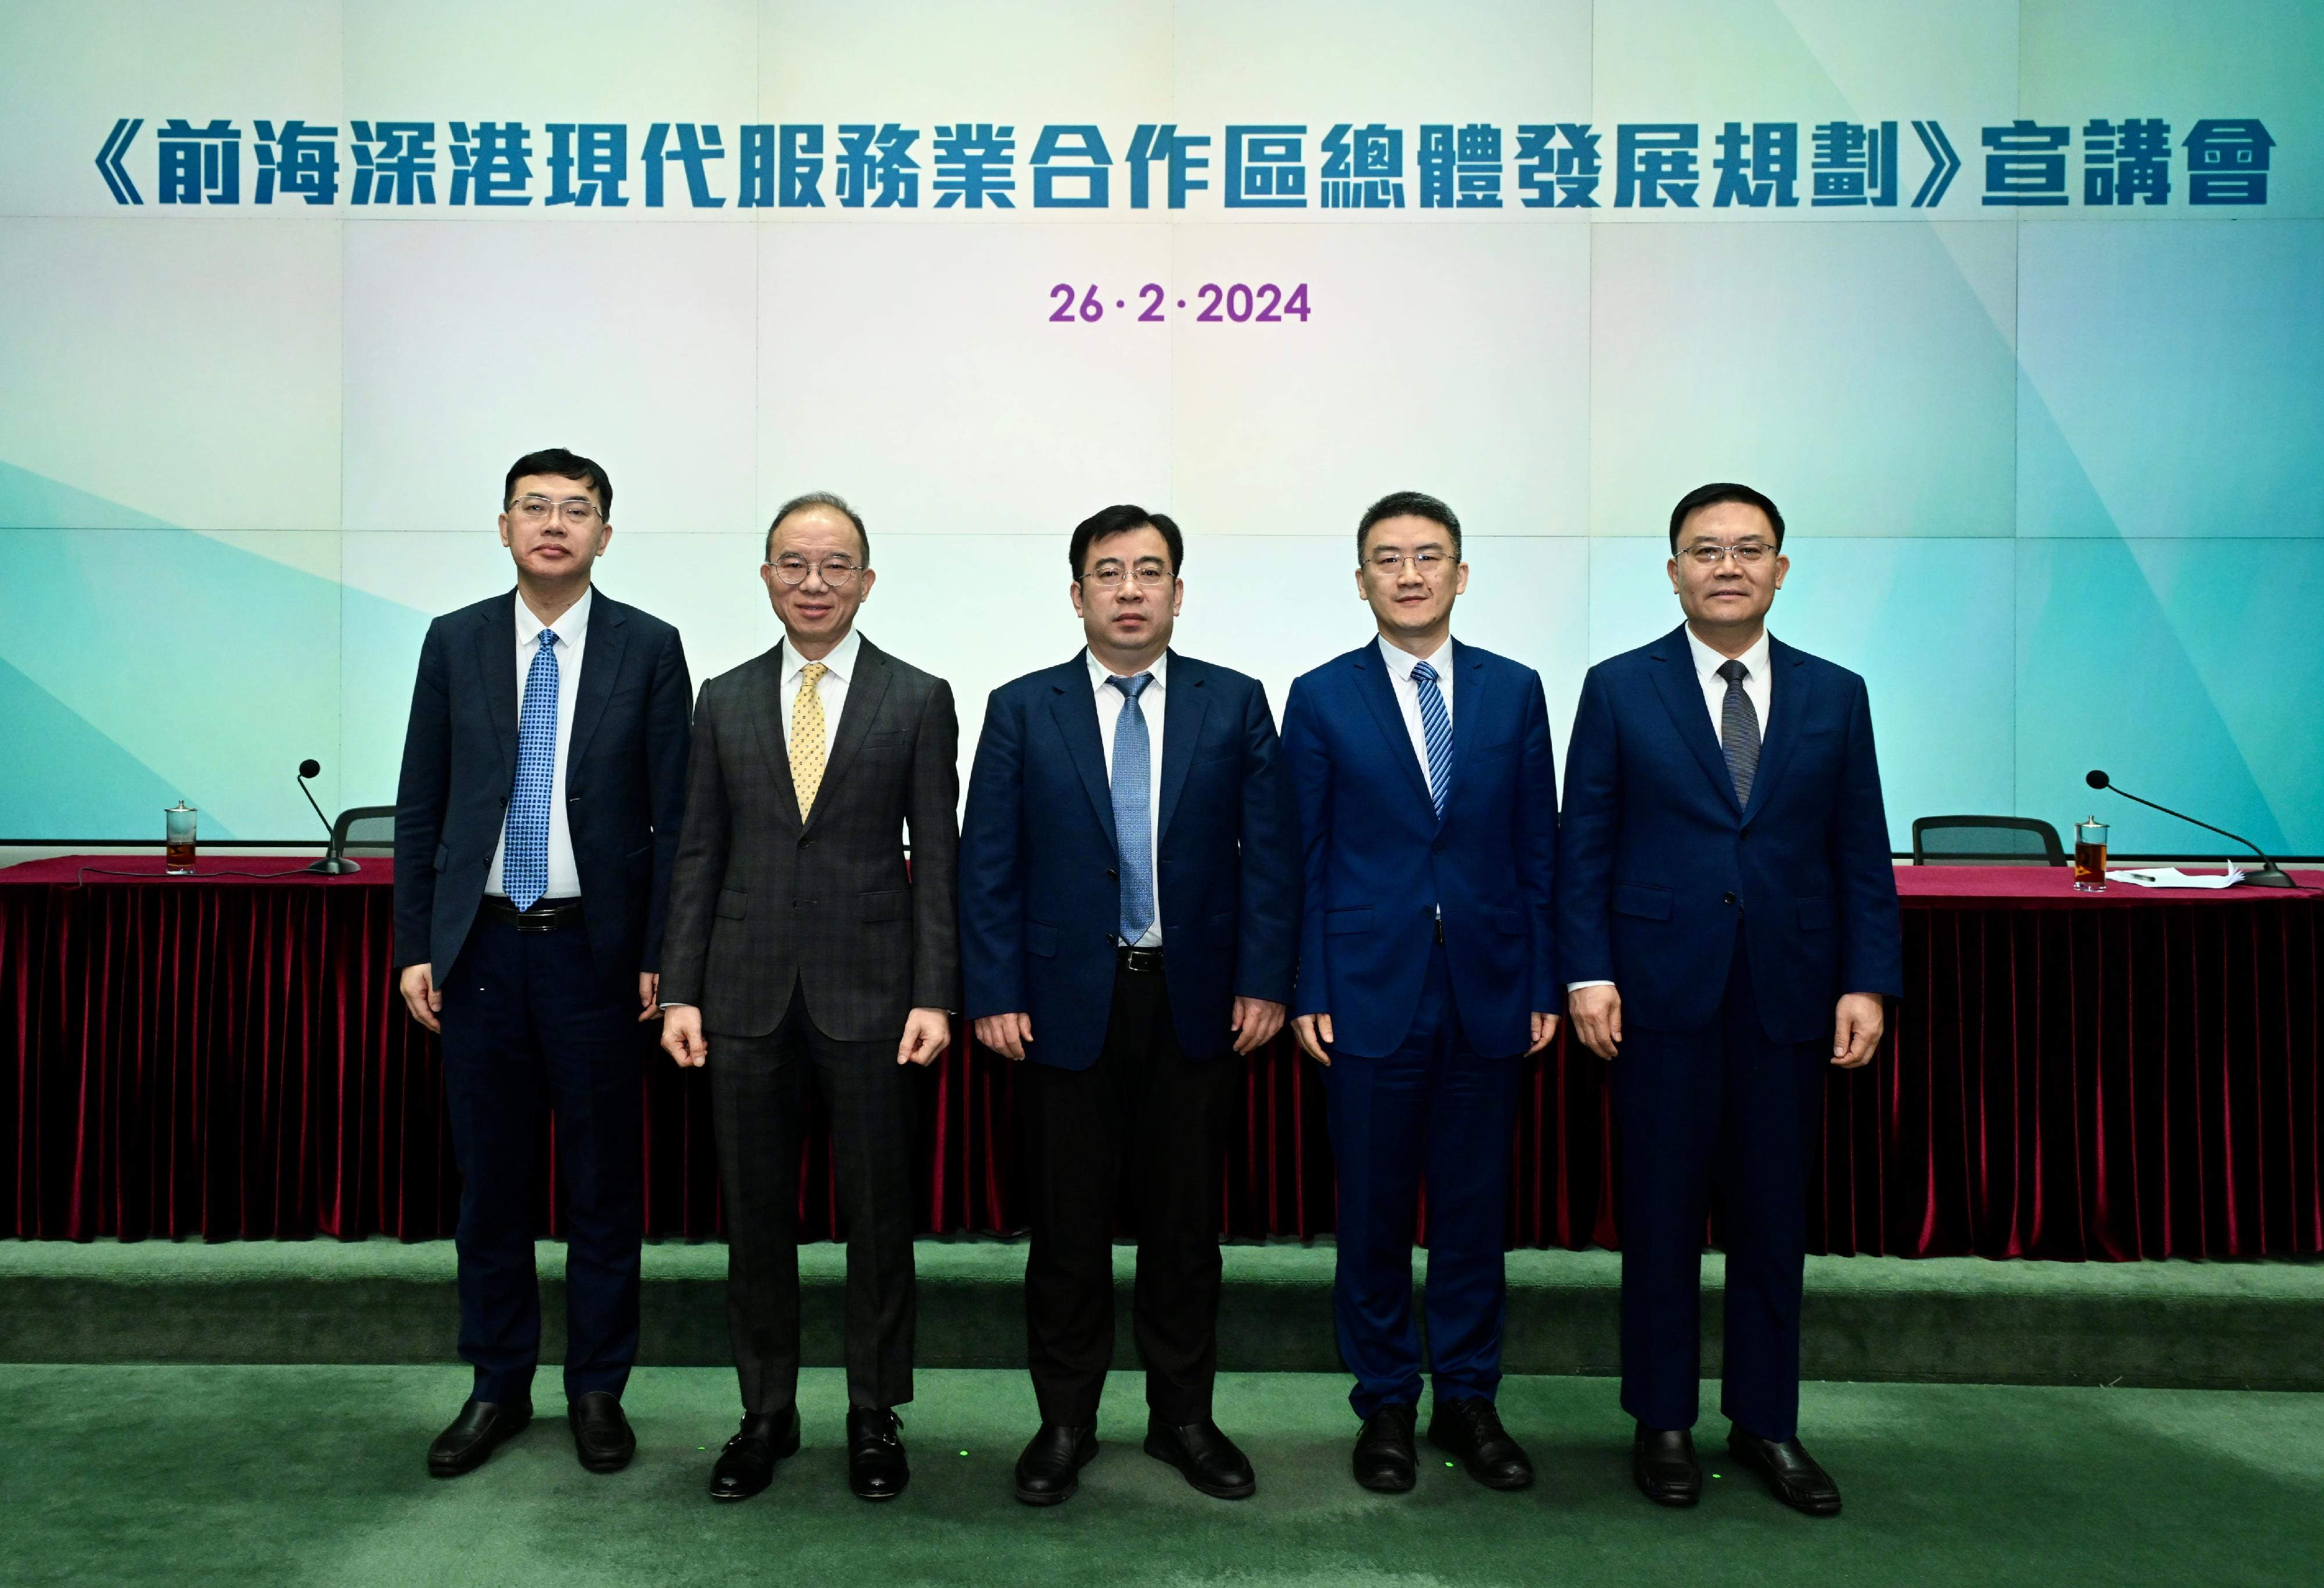 The Hong Kong Special Administrative Region Government held a seminar to promote the Overall Development Plan for the Qianhai Shenzhen-Hong Kong Modern Service Industry Co-operation Zone at Central Government Offices today (26 February 2024). Photo shows (from left) the Director of Guangdong Provincial Development and Reform Commission, Mr Ai Xuefeng; the Secretary for Constitutional and Mainland Affairs, Mr Erick Tsang Kwok-wai; the Director General of the Department of Regional Economy of the National Development and Reform Commission, Mr Wu Shulin; Deputy Director General of the Third Bureau of the Hong Kong and Macao Work Office of the Communist Party of China Central Committee, Mr Cao Qing-tao; and Vice Mayor of the Shenzhen Municipal People's Government Mr Wang Shourui, having a group photo.